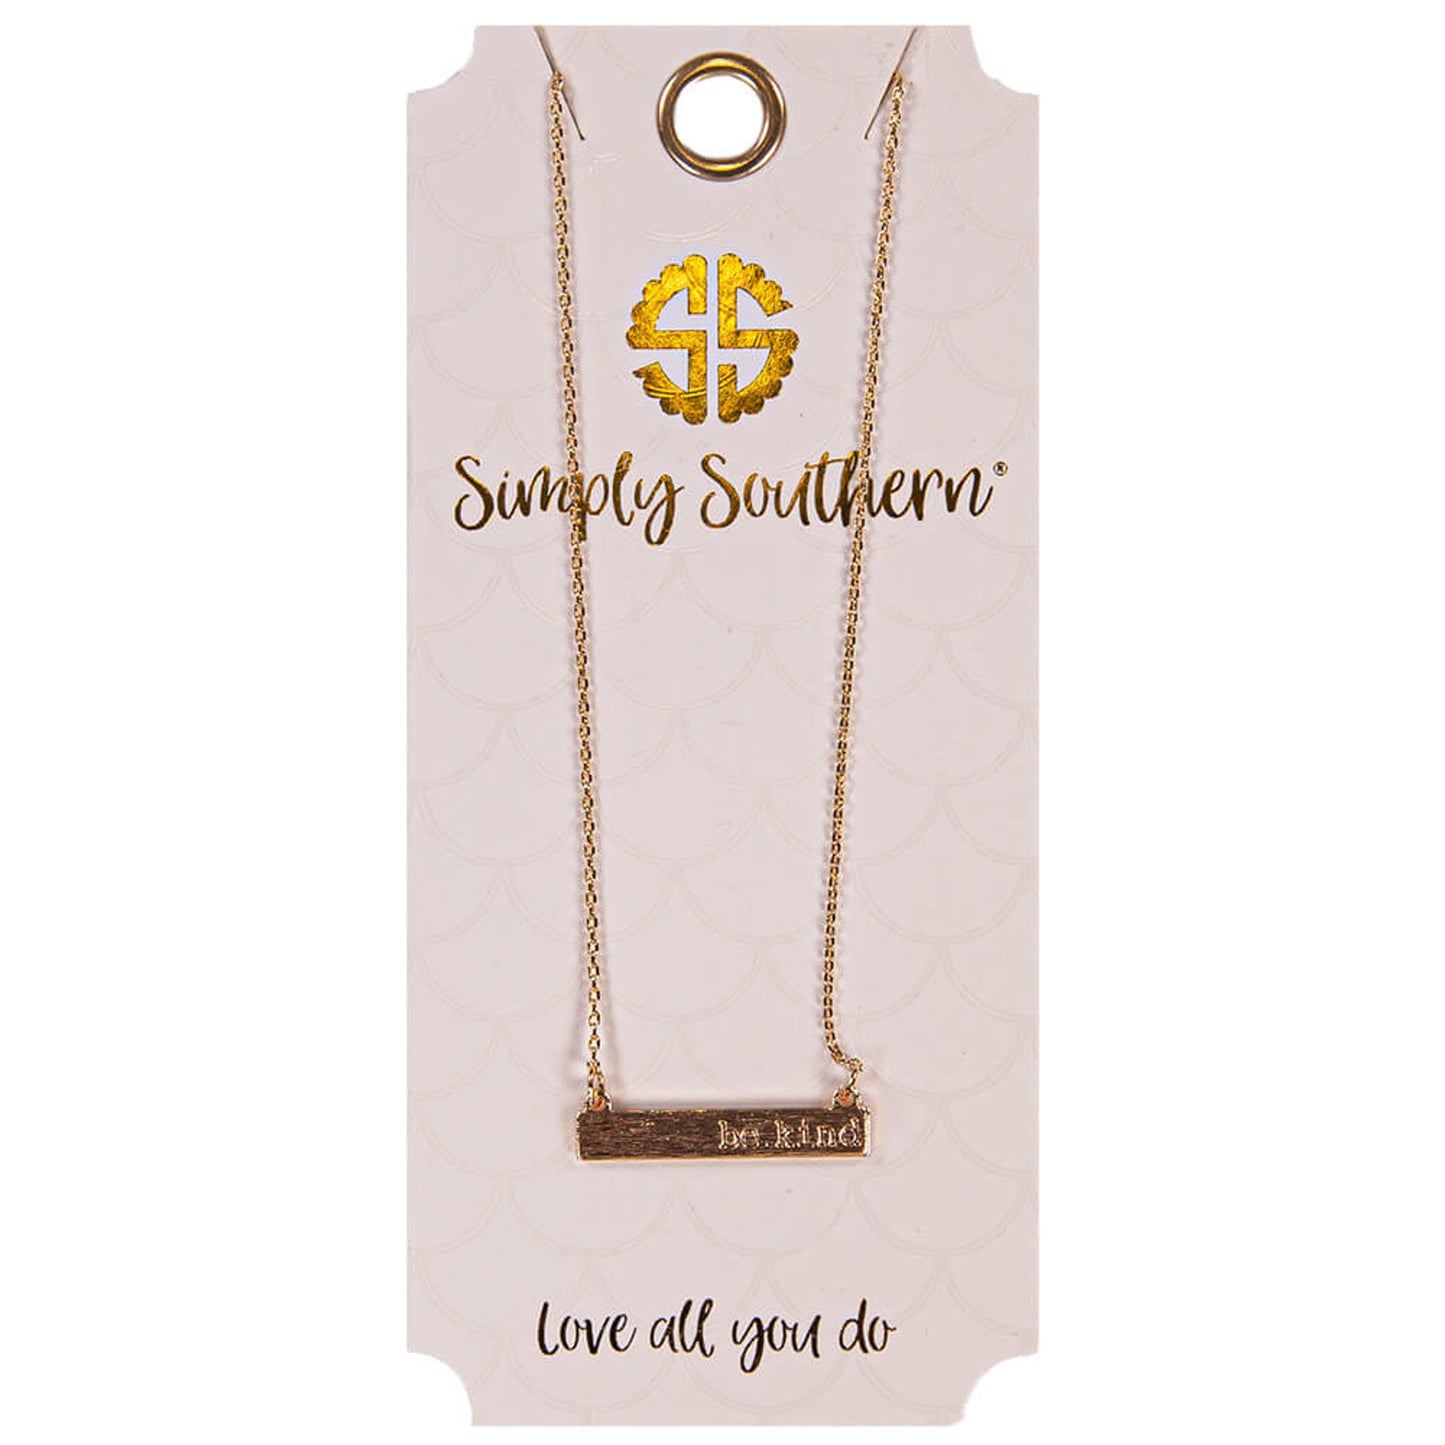 * Simply Southern Dainty Necklace